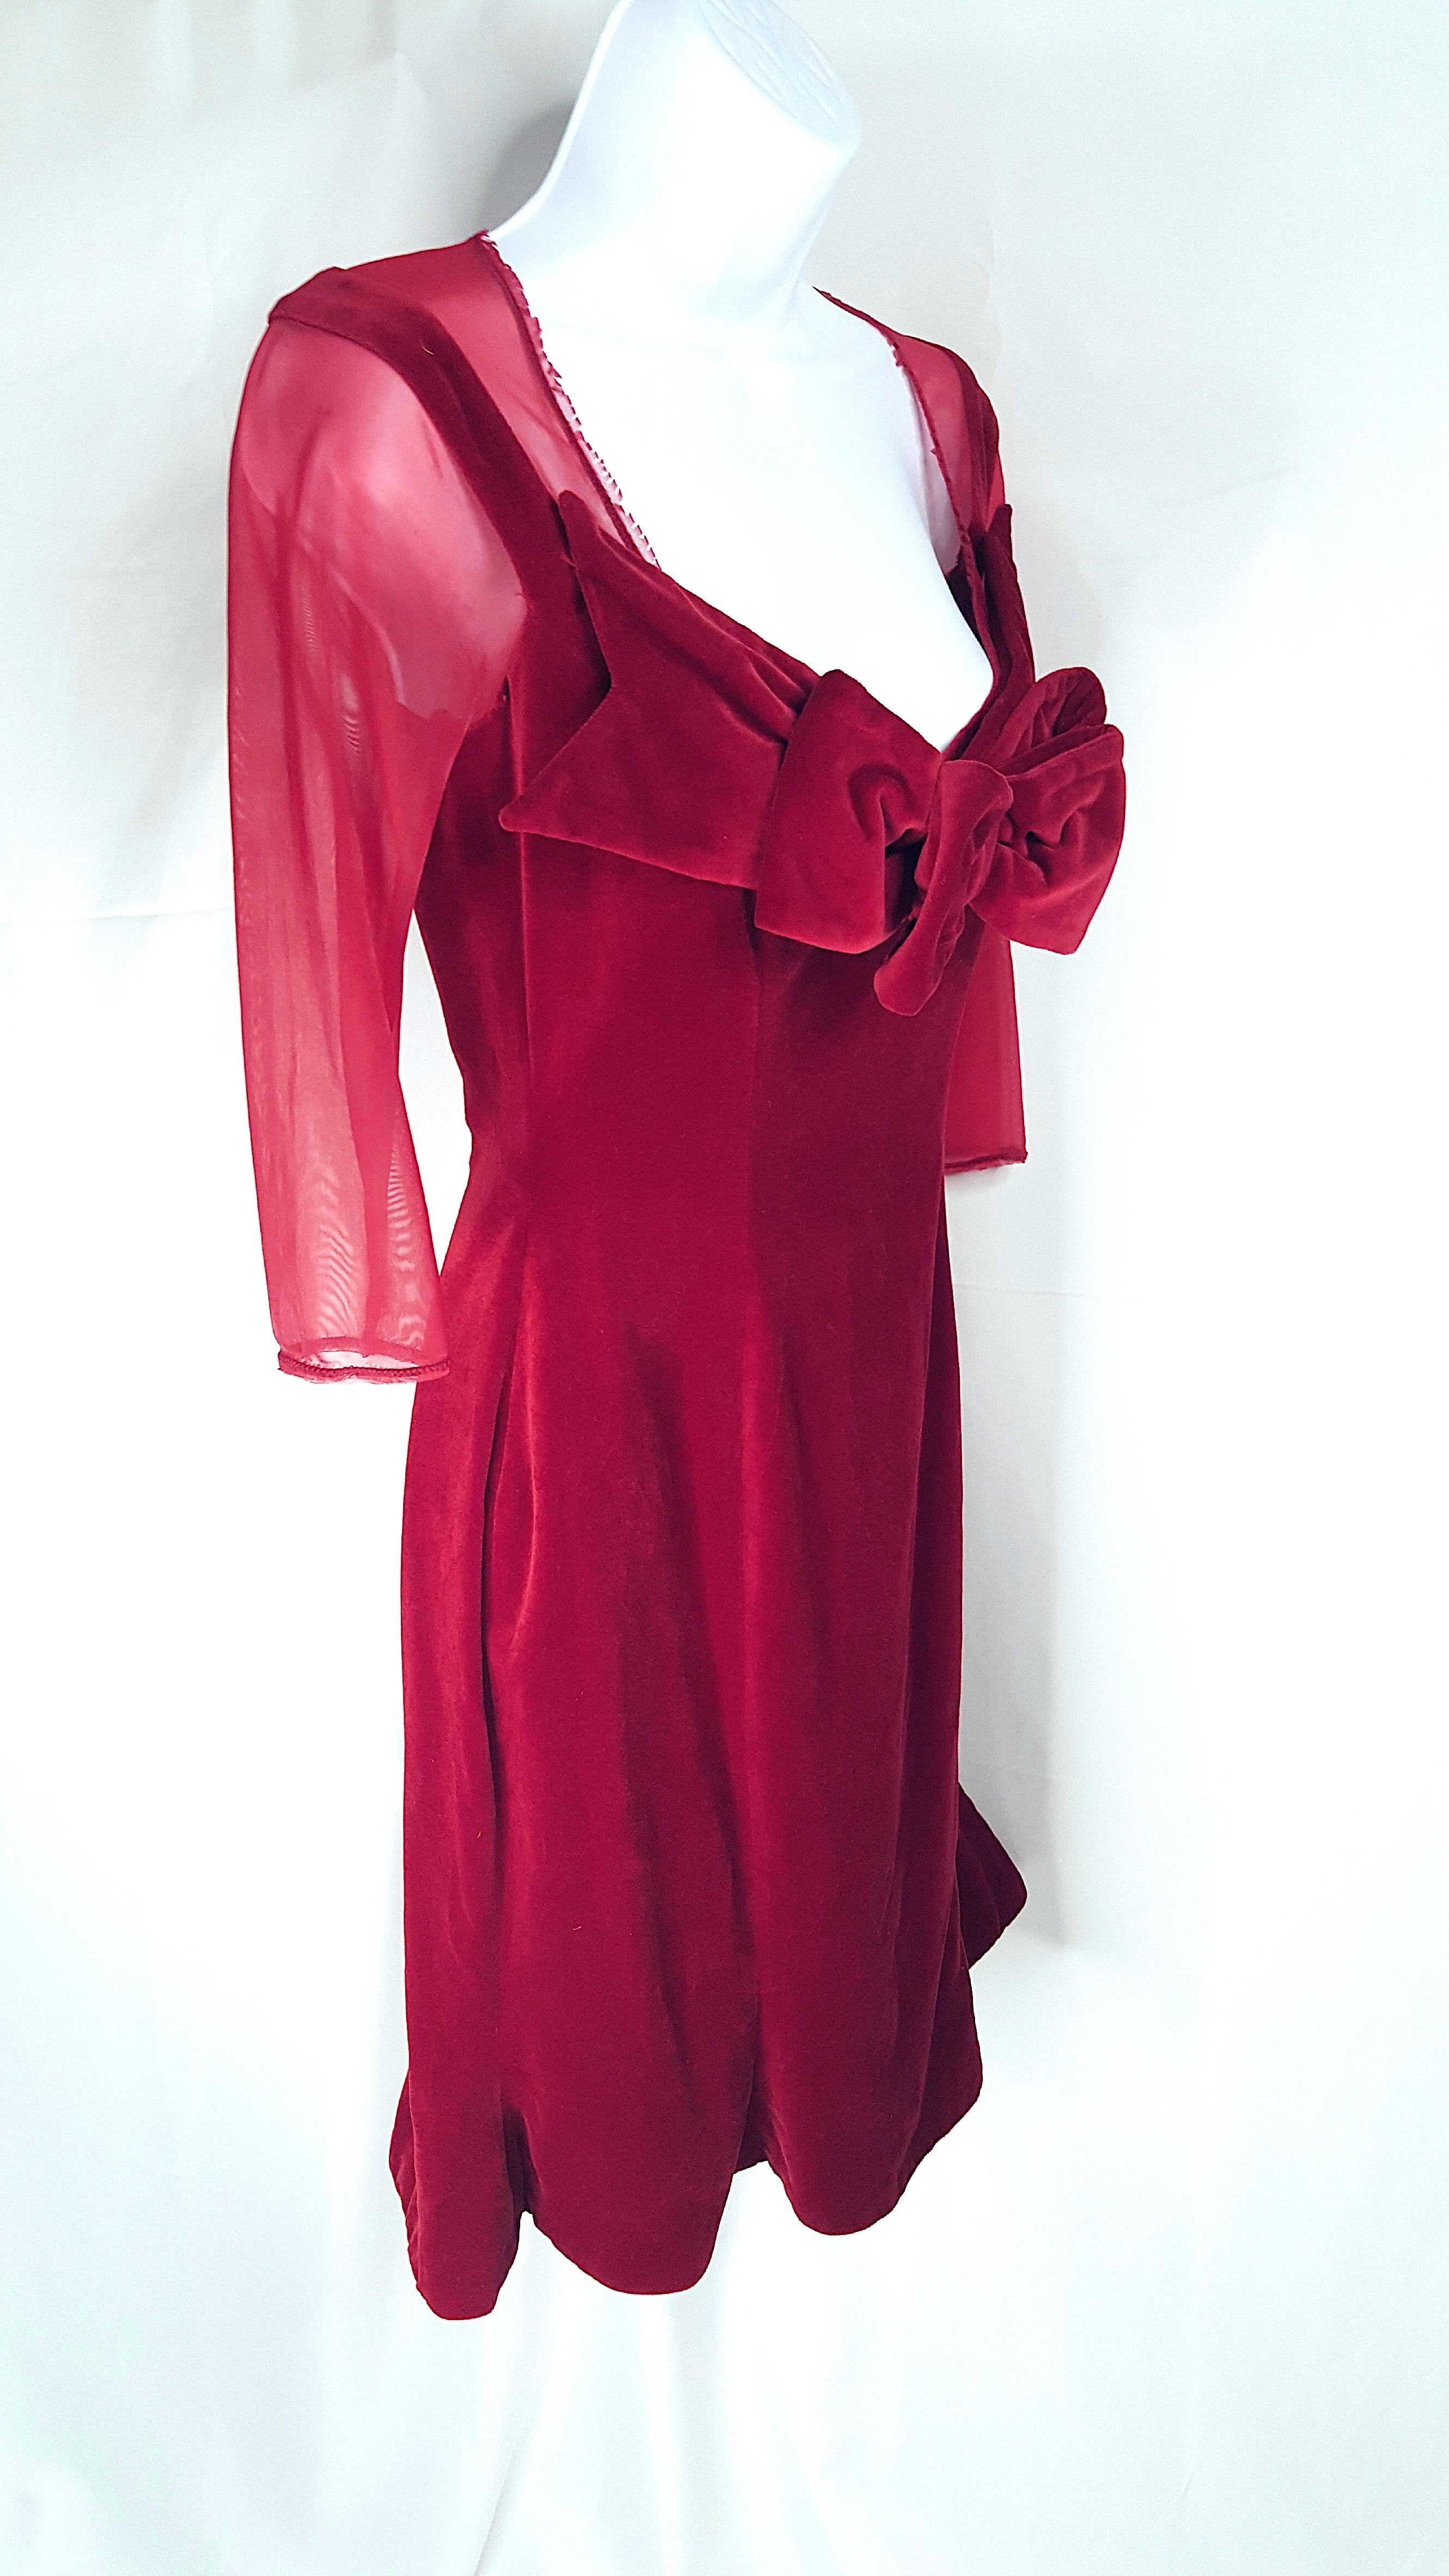 British Vivienne Westwood (1941-2022) designed this corset-style hourglass red velvet evening dress with its outsized bow and sheer moire faux-underlay while producing her 